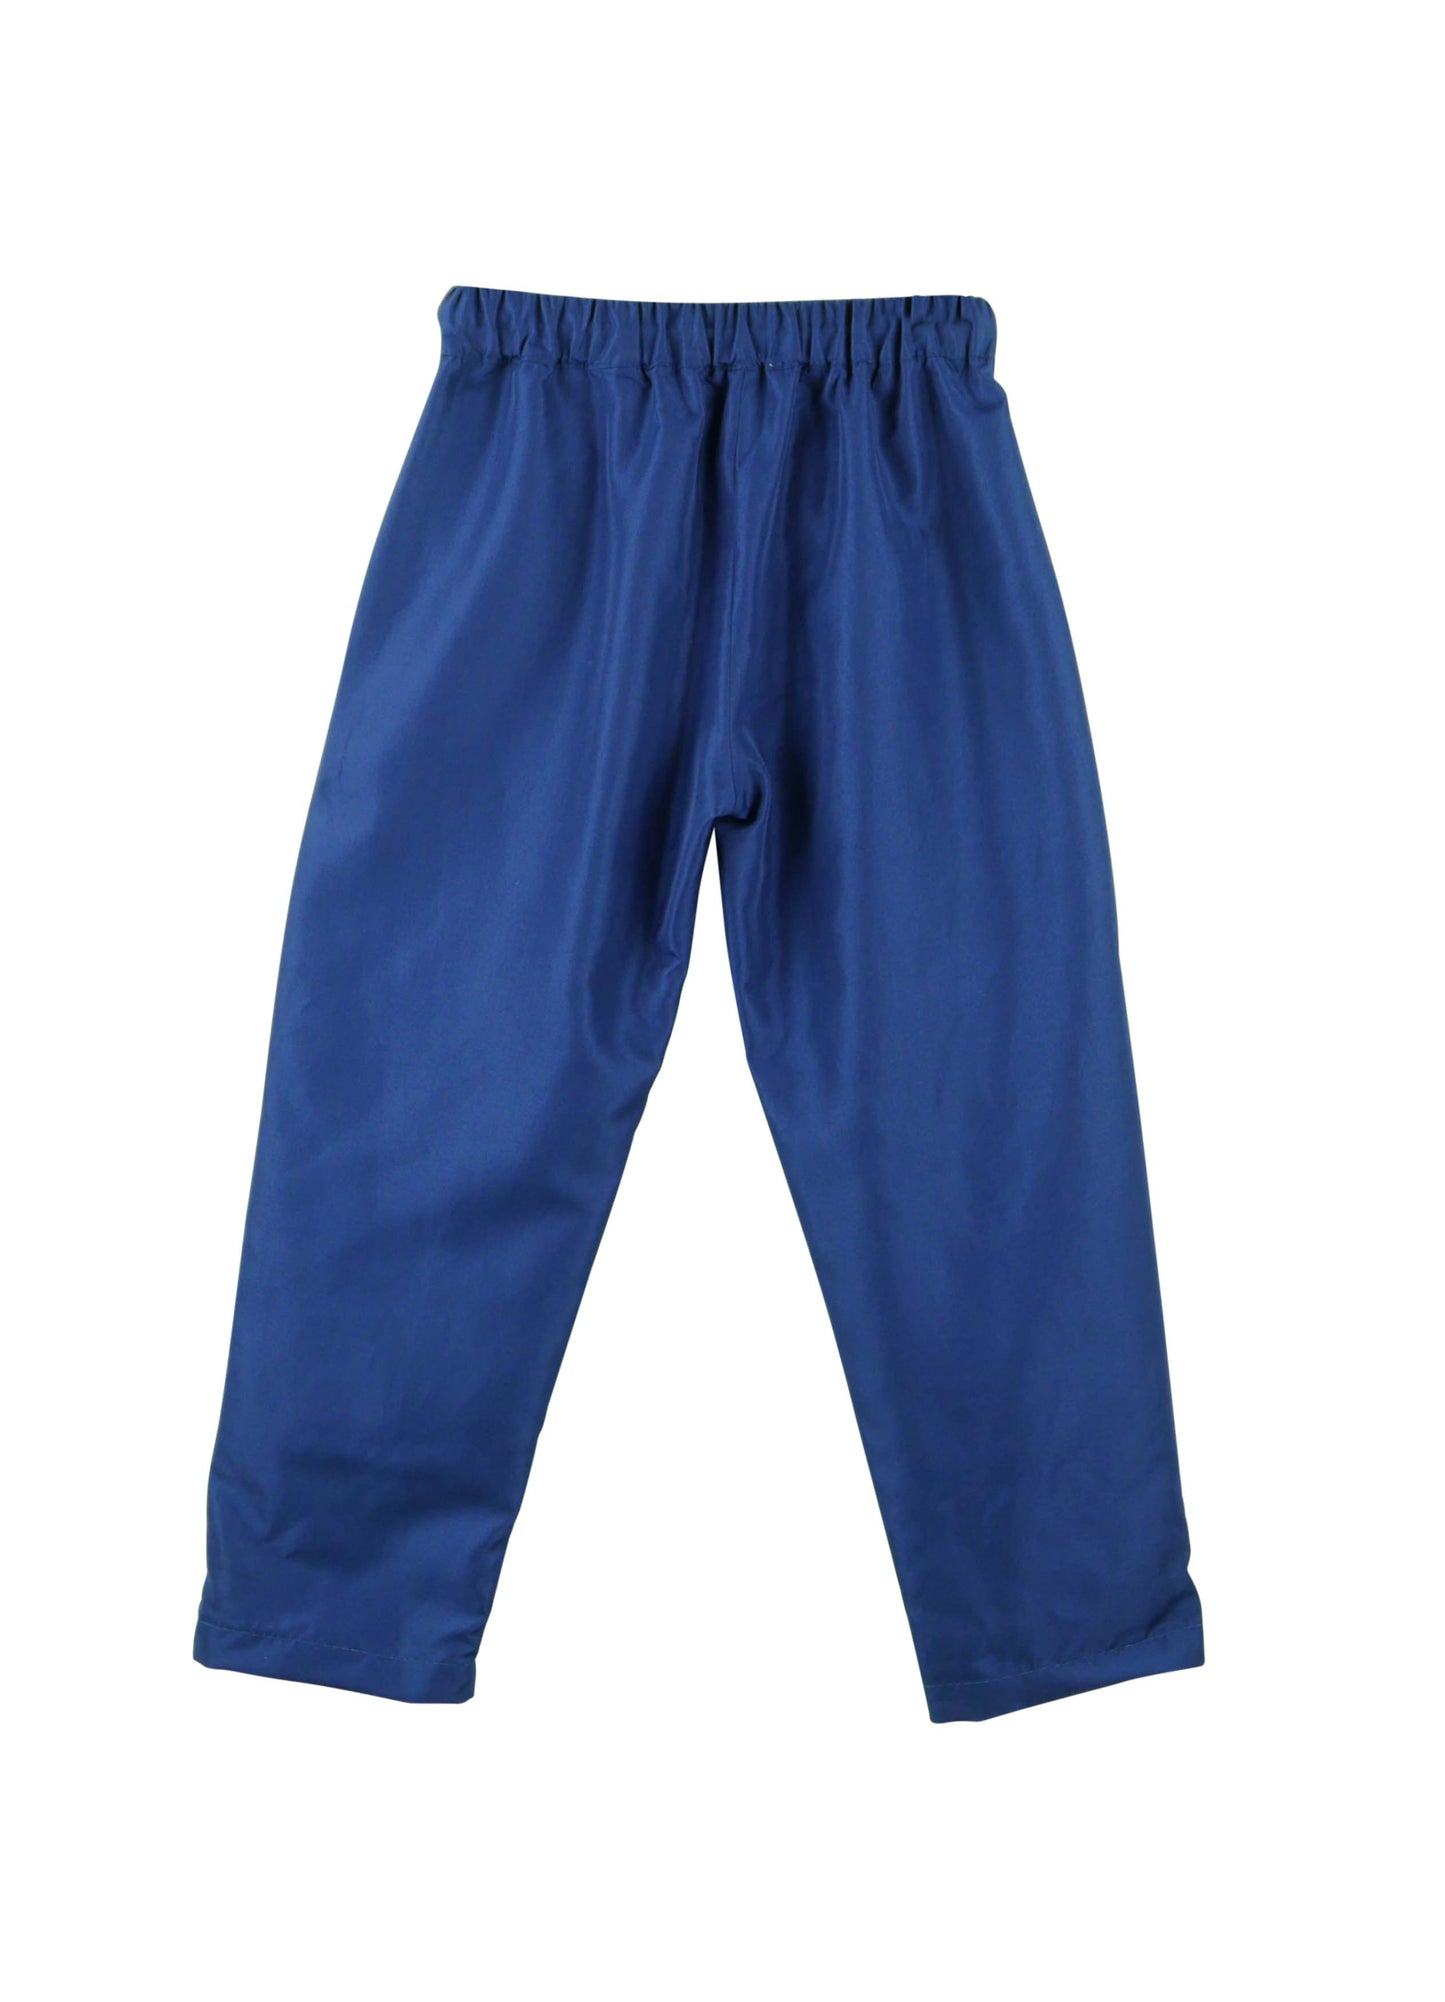 Trousers Nr. 06 - Navy